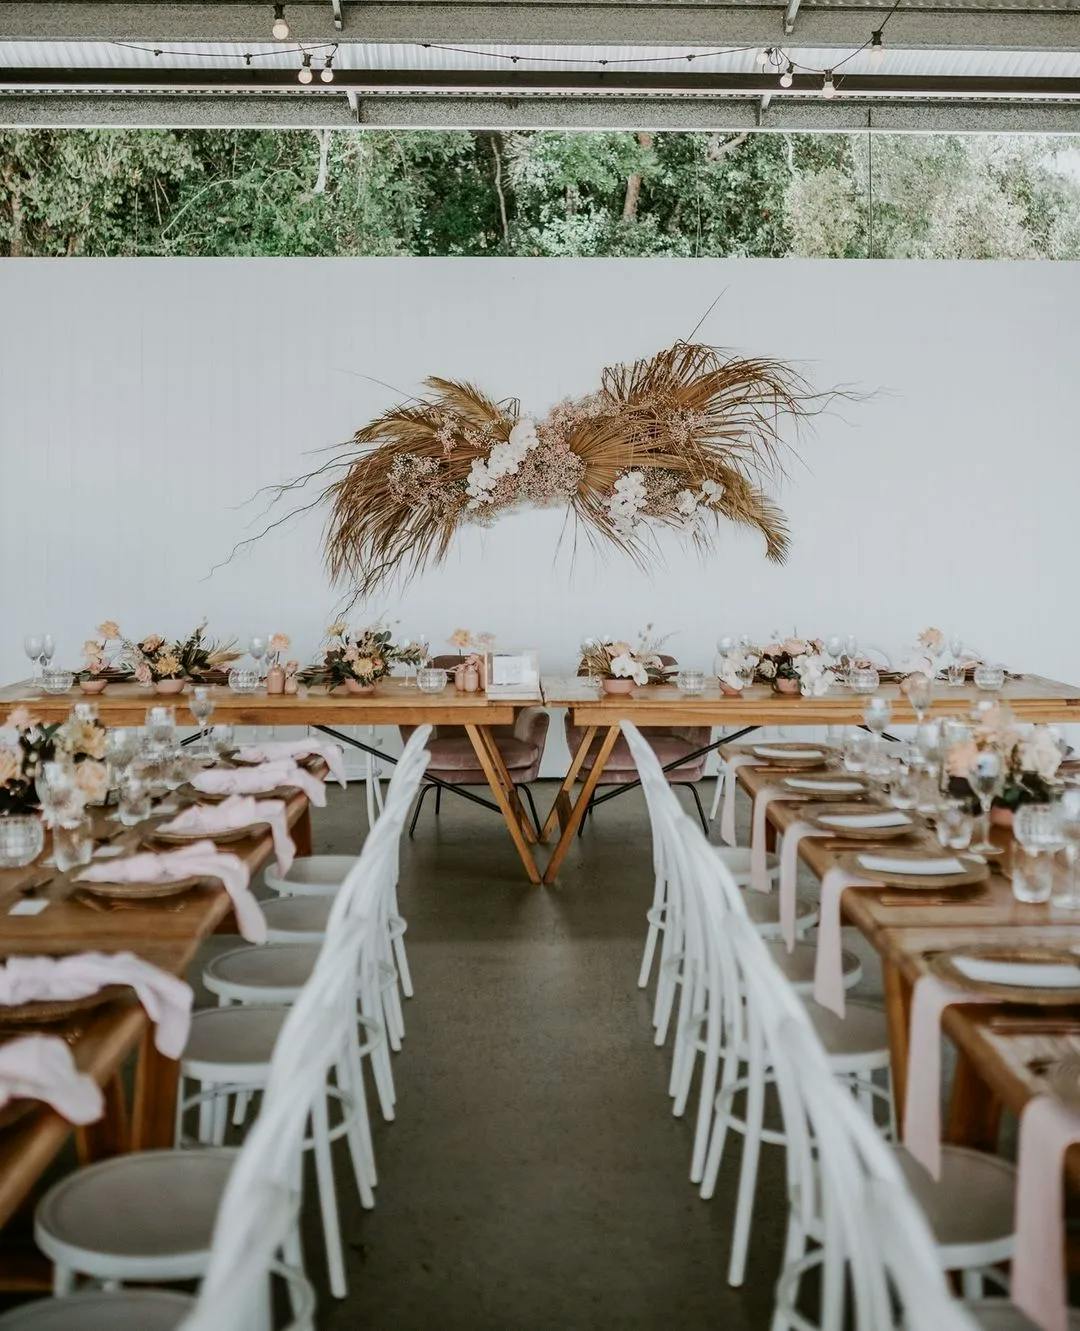 A beautifully set dinner table in an outdoor setting with white chairs and wooden tables. The tables are decorated with pink napkins, flowers, and glassware. A white wall with a rustic dried floral arrangement is visible in the background.